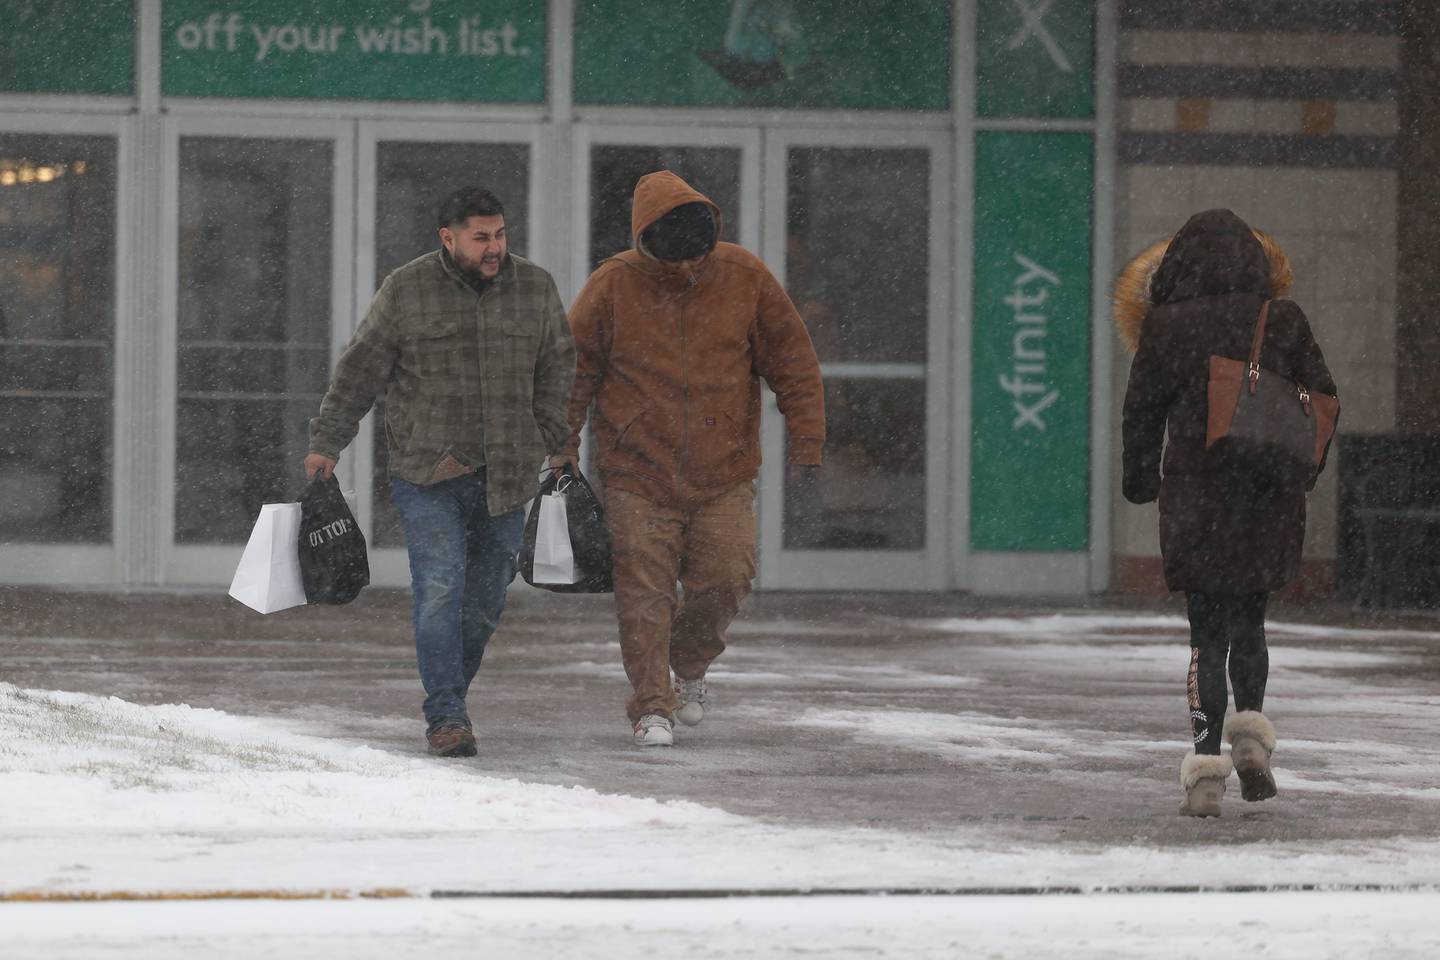 Last minute holiday shoppers brave the snow at the Lewis Joliet Mall.